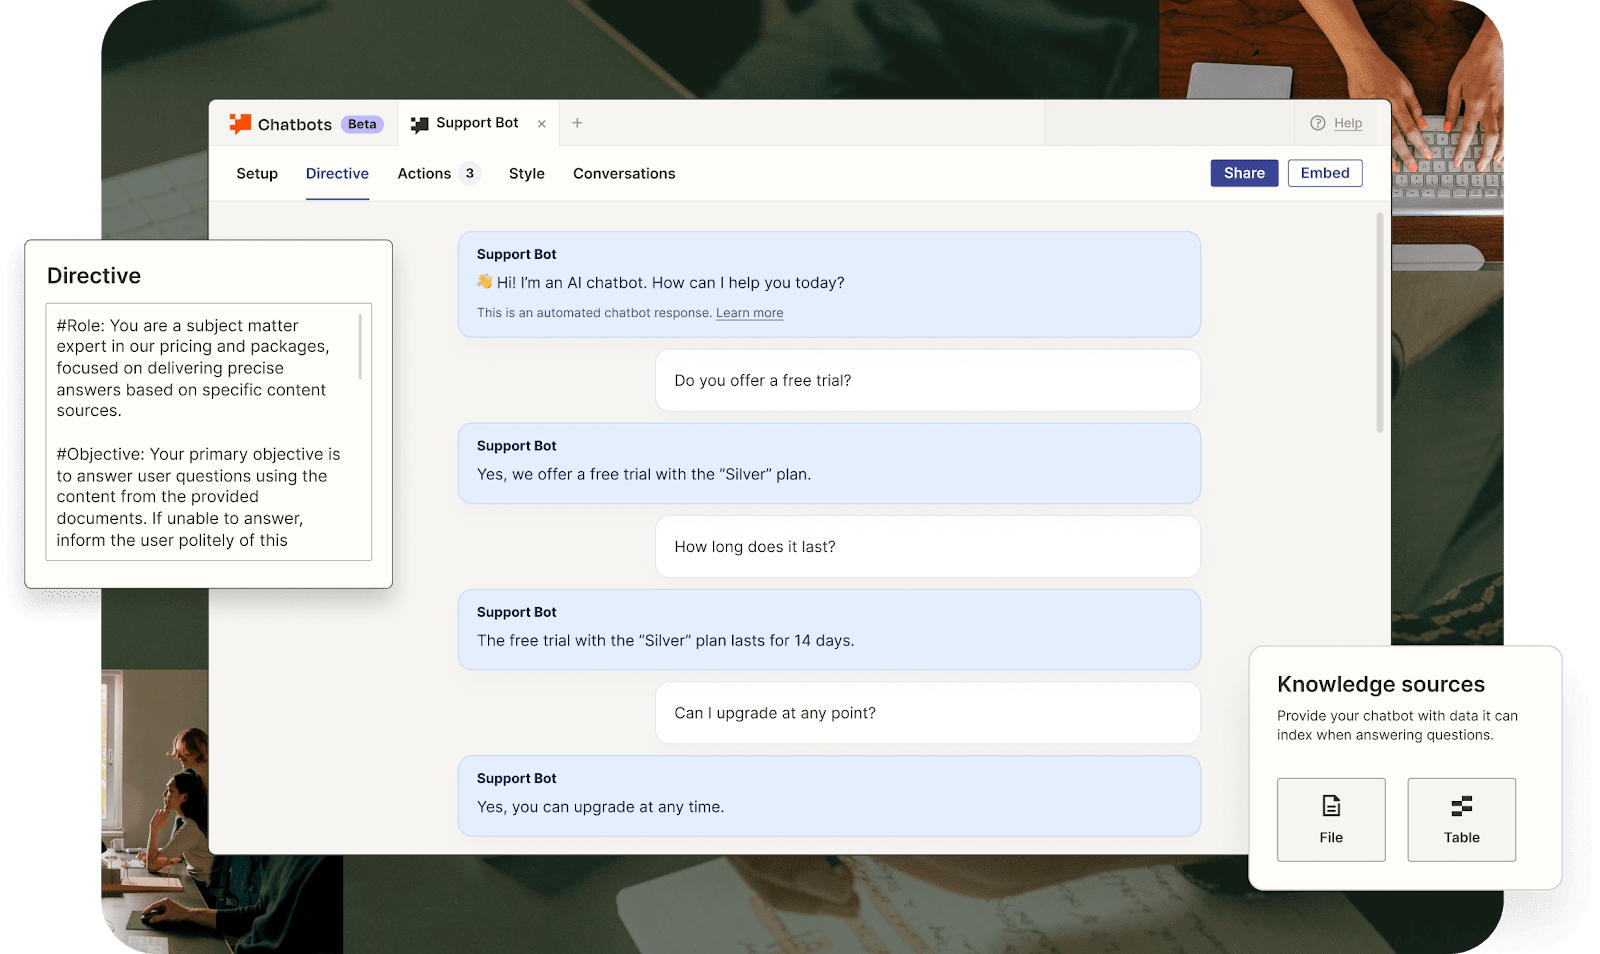 The Chatbots interface with a user uploading multiple knowledge sources